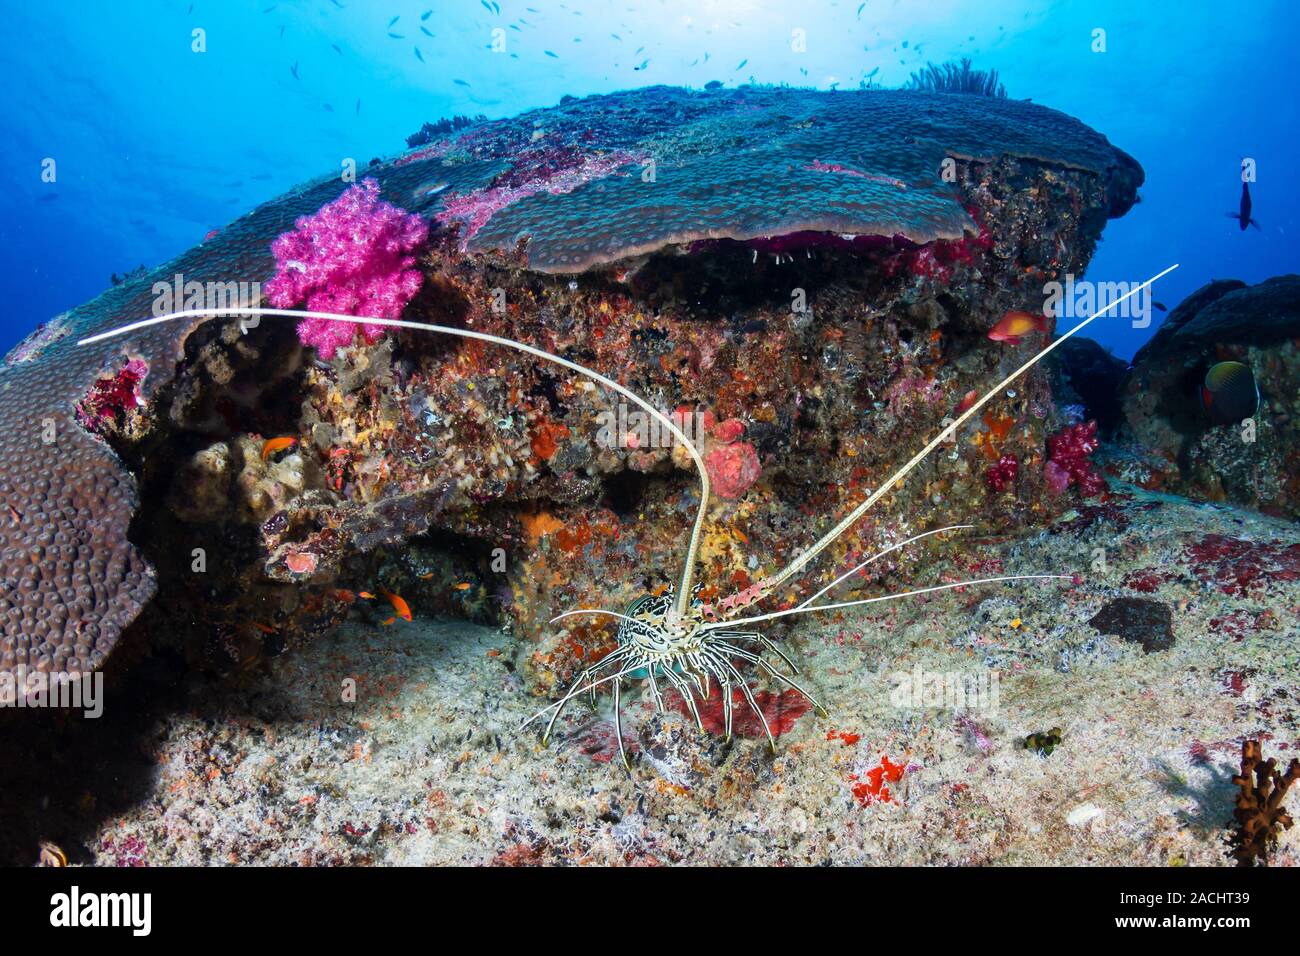 Large Lobster under a ledge on a tropical coral reef Stock Photo